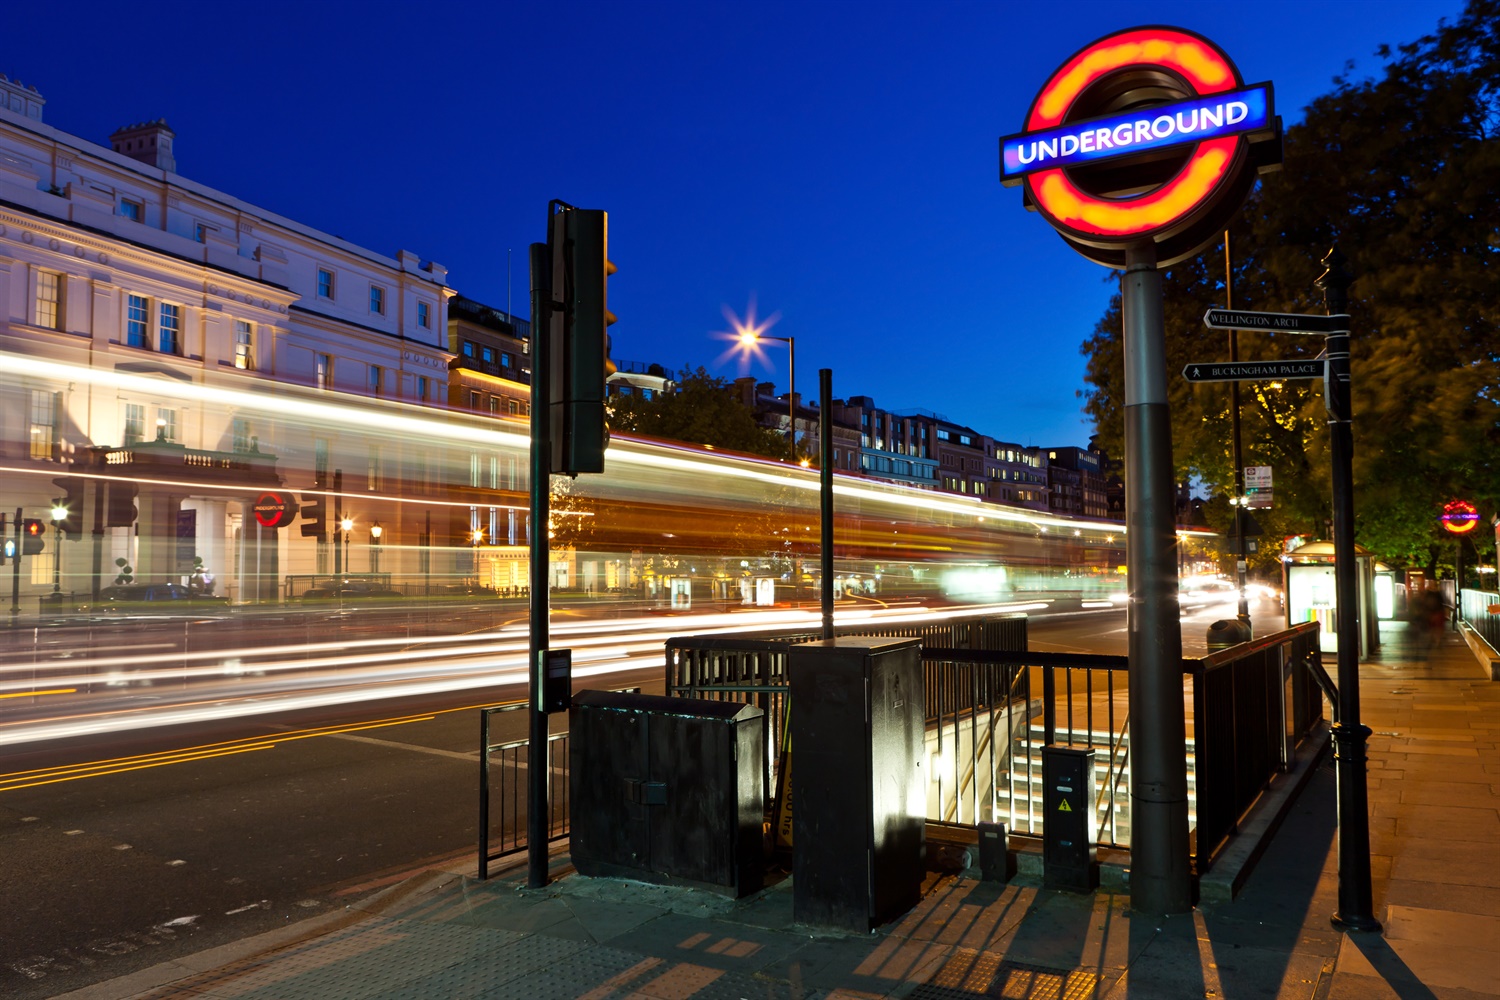 ‘Affordable’ Hopper fares to be extended on London Tube network